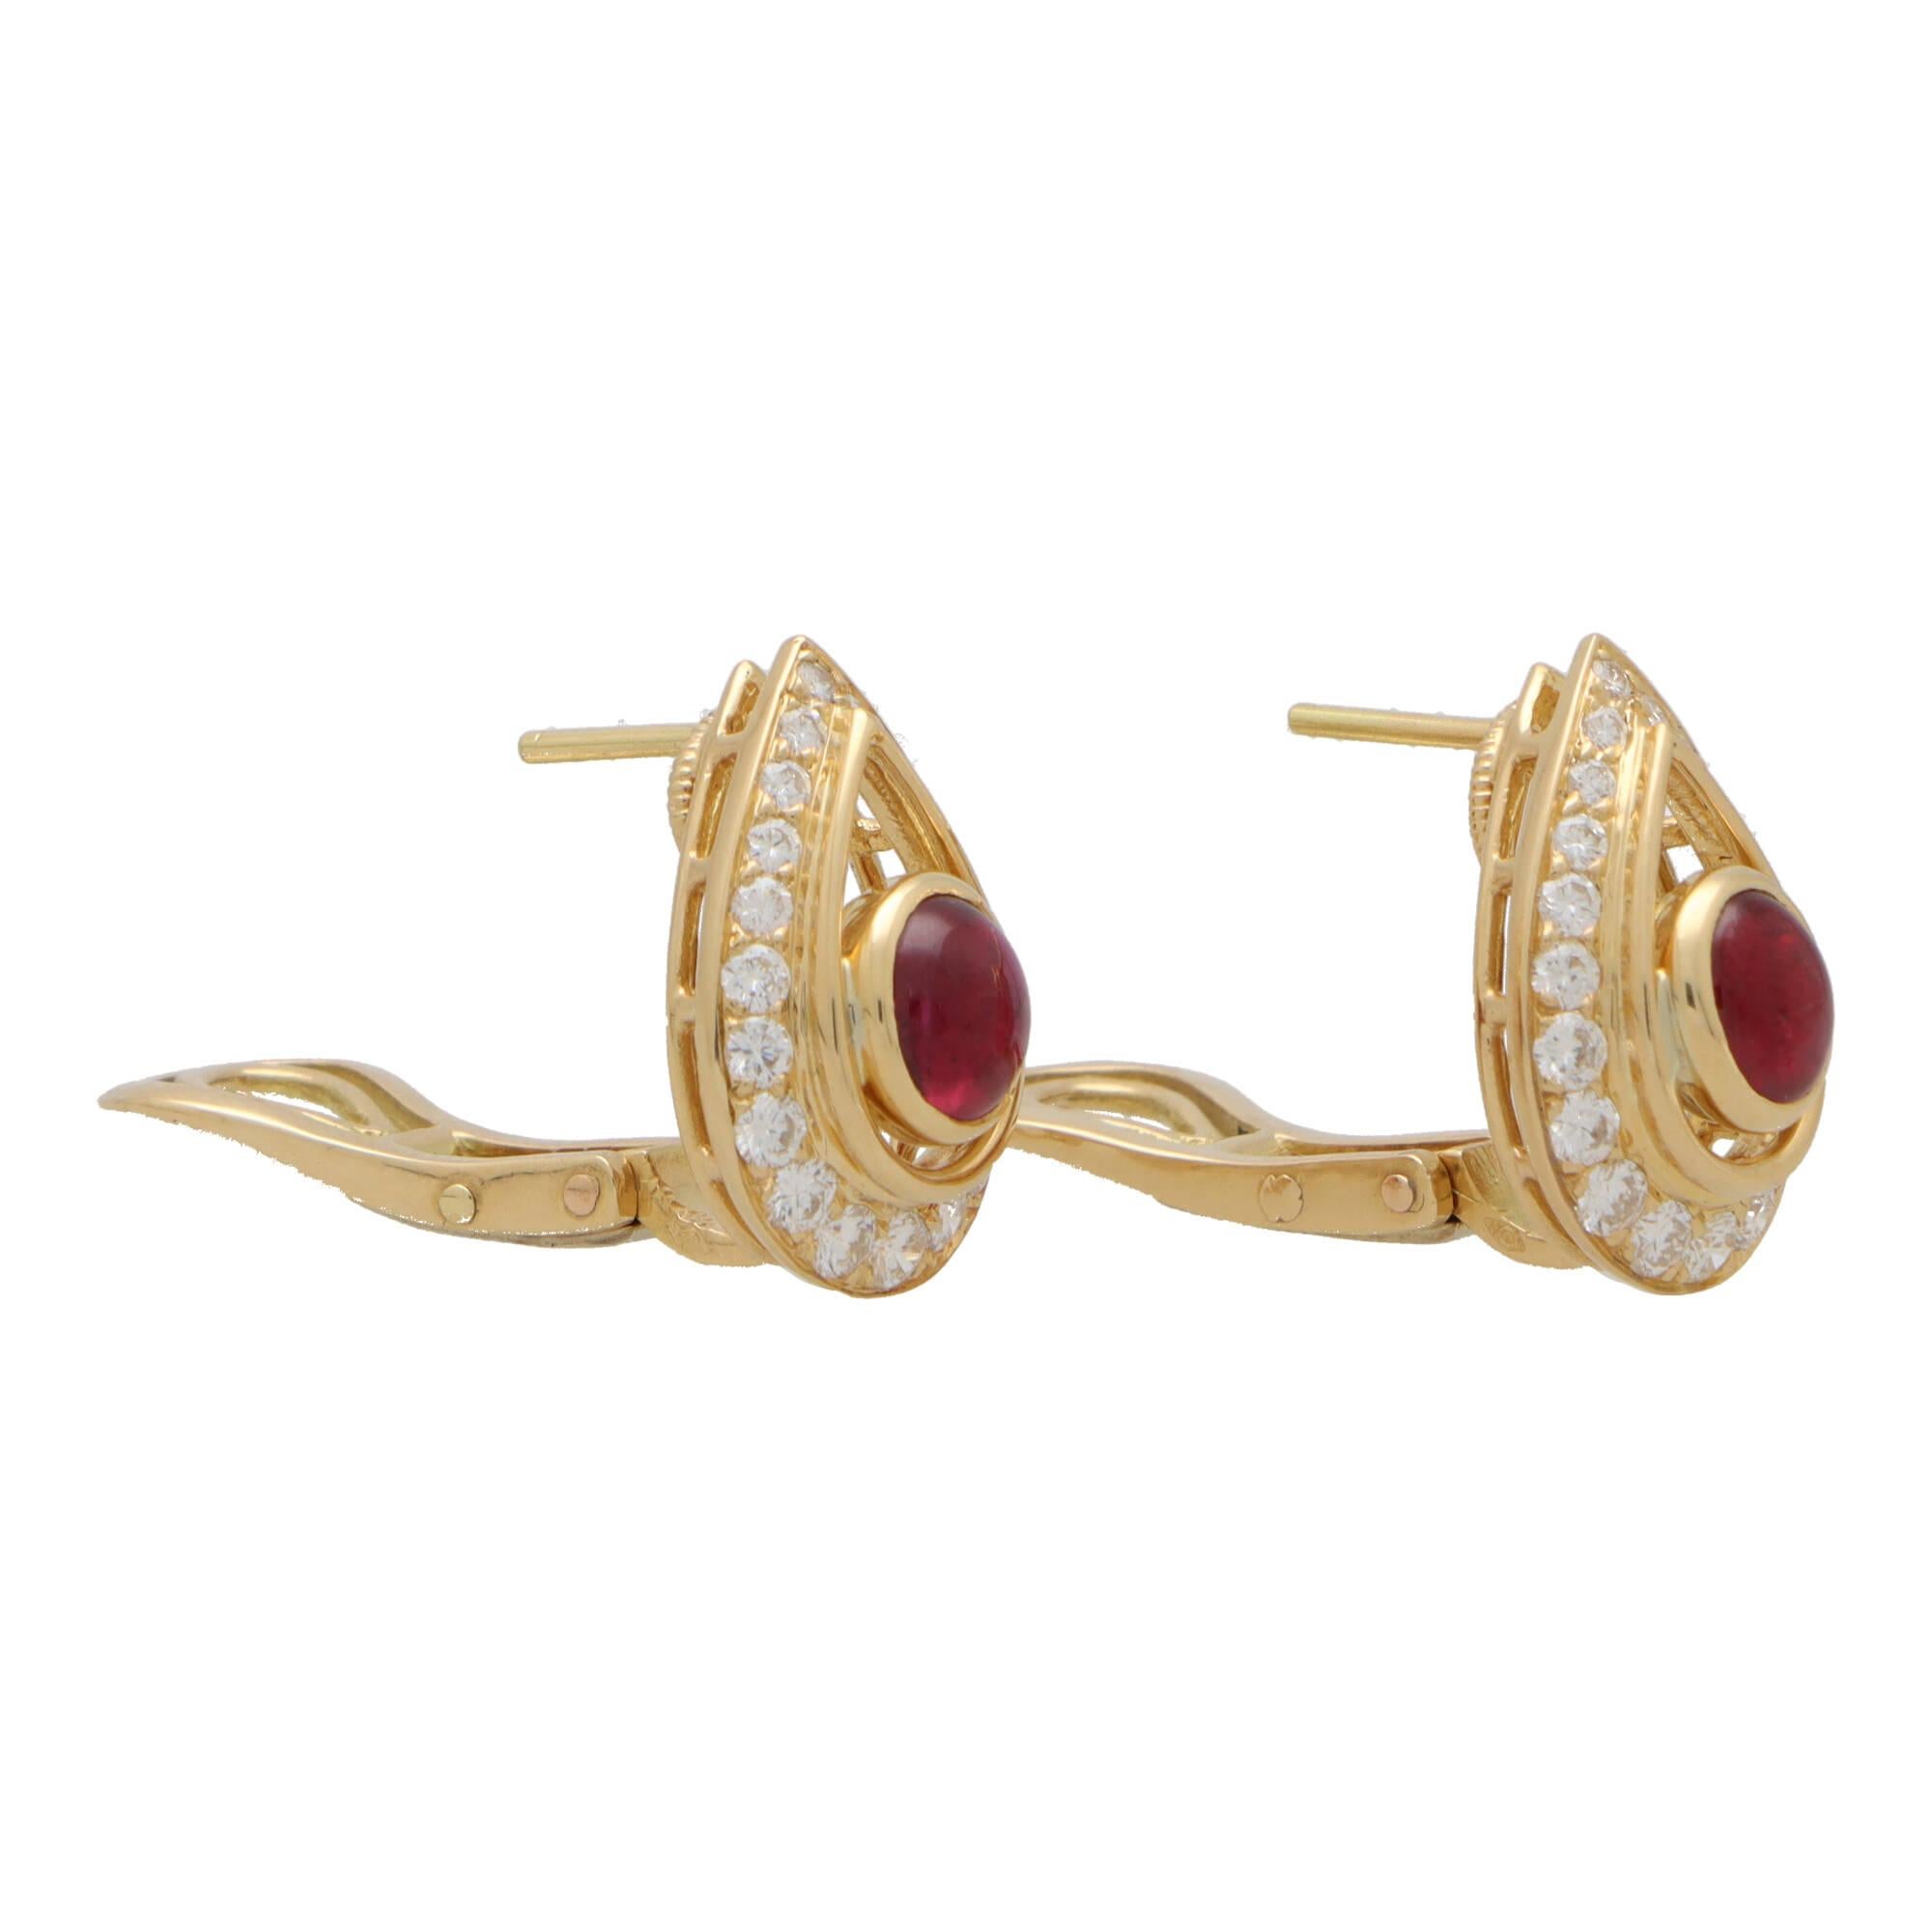 Retro Vintage Cartier Cabochon Ruby and Diamond Earrings